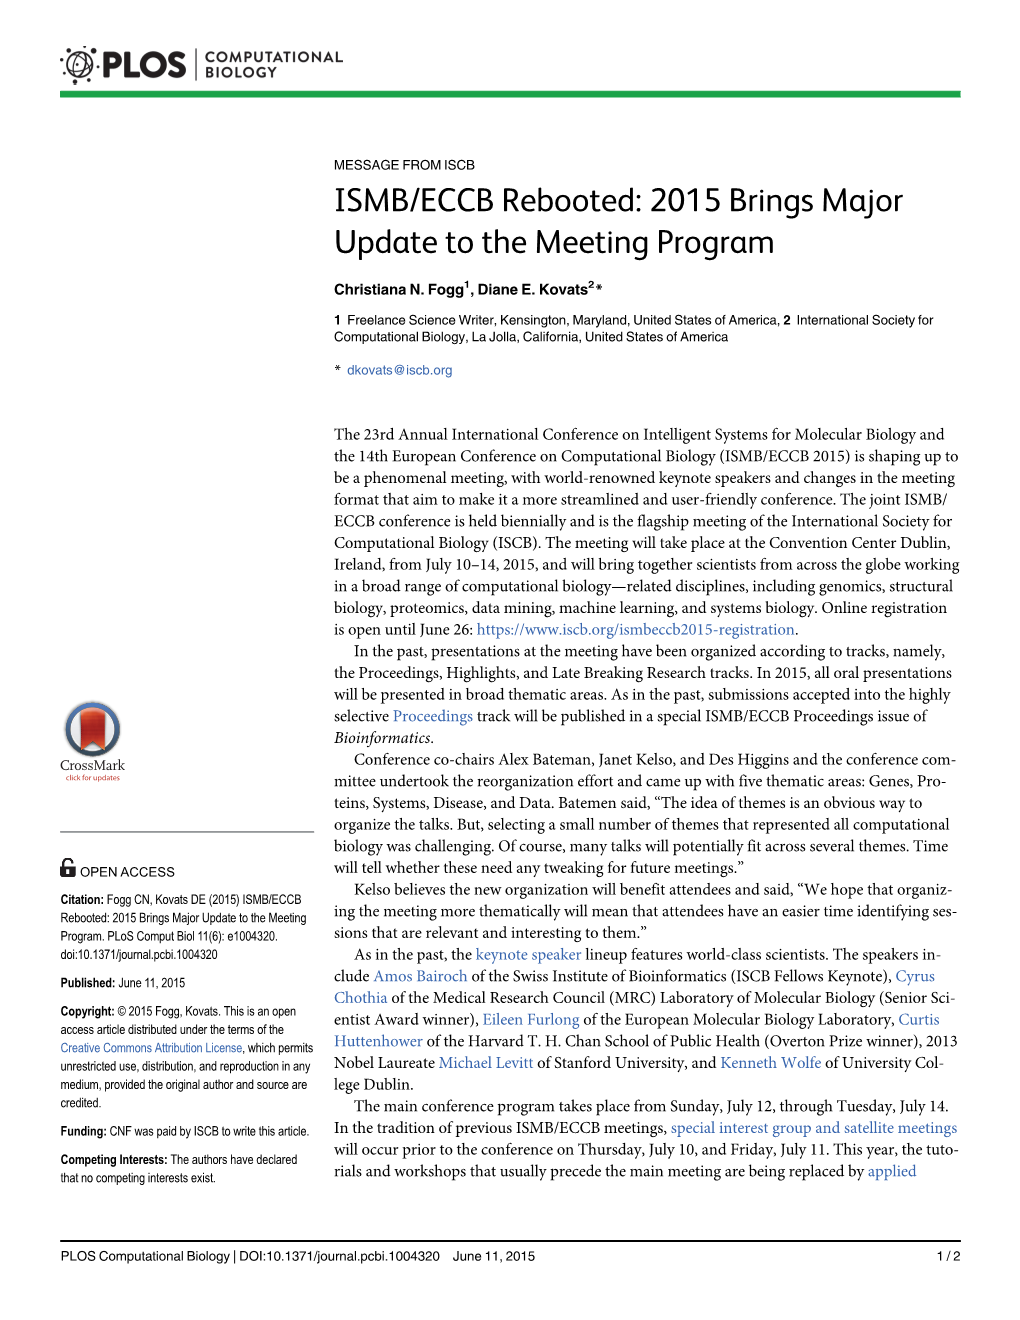 ISMB/ECCB Rebooted: 2015 Brings Major Update to the Meeting Program